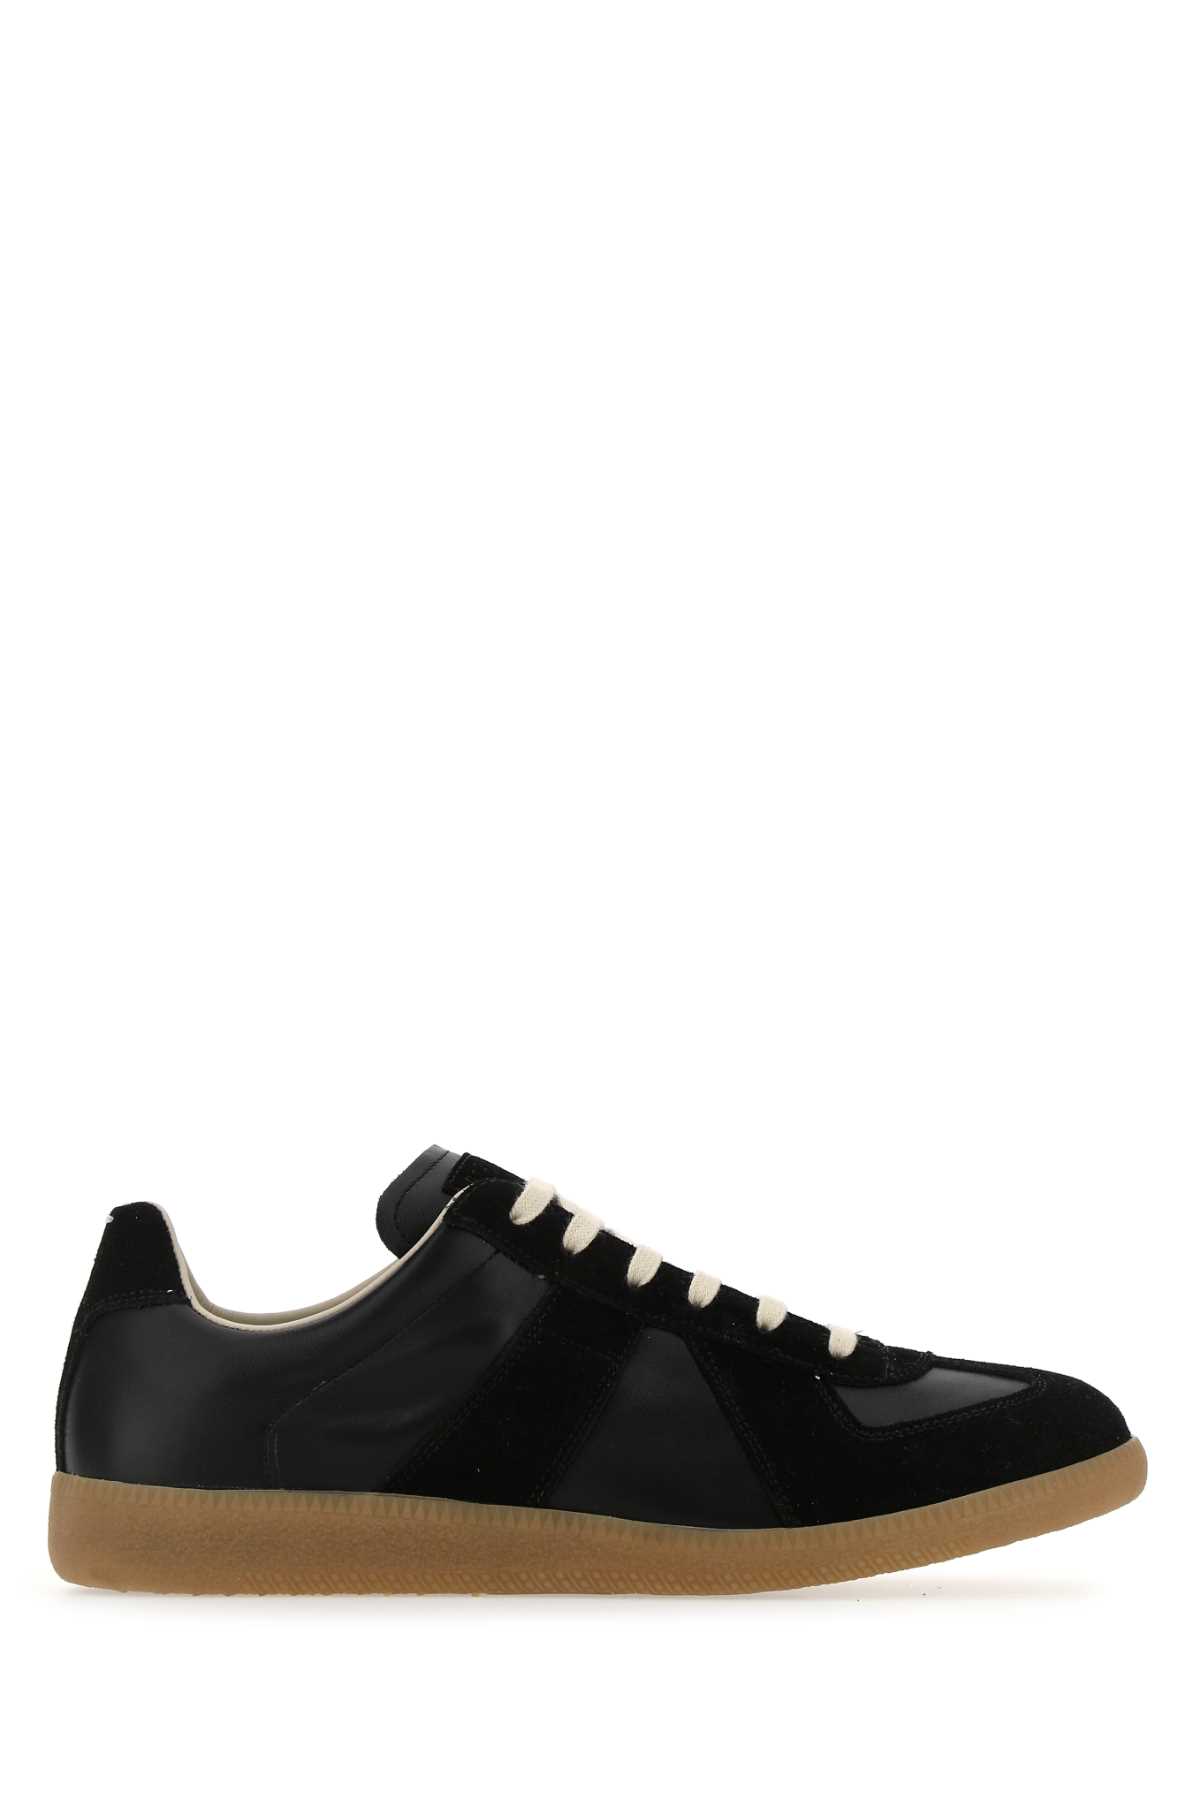 Shop Maison Margiela Black Leather And Suede Replica Sneakers In H6851